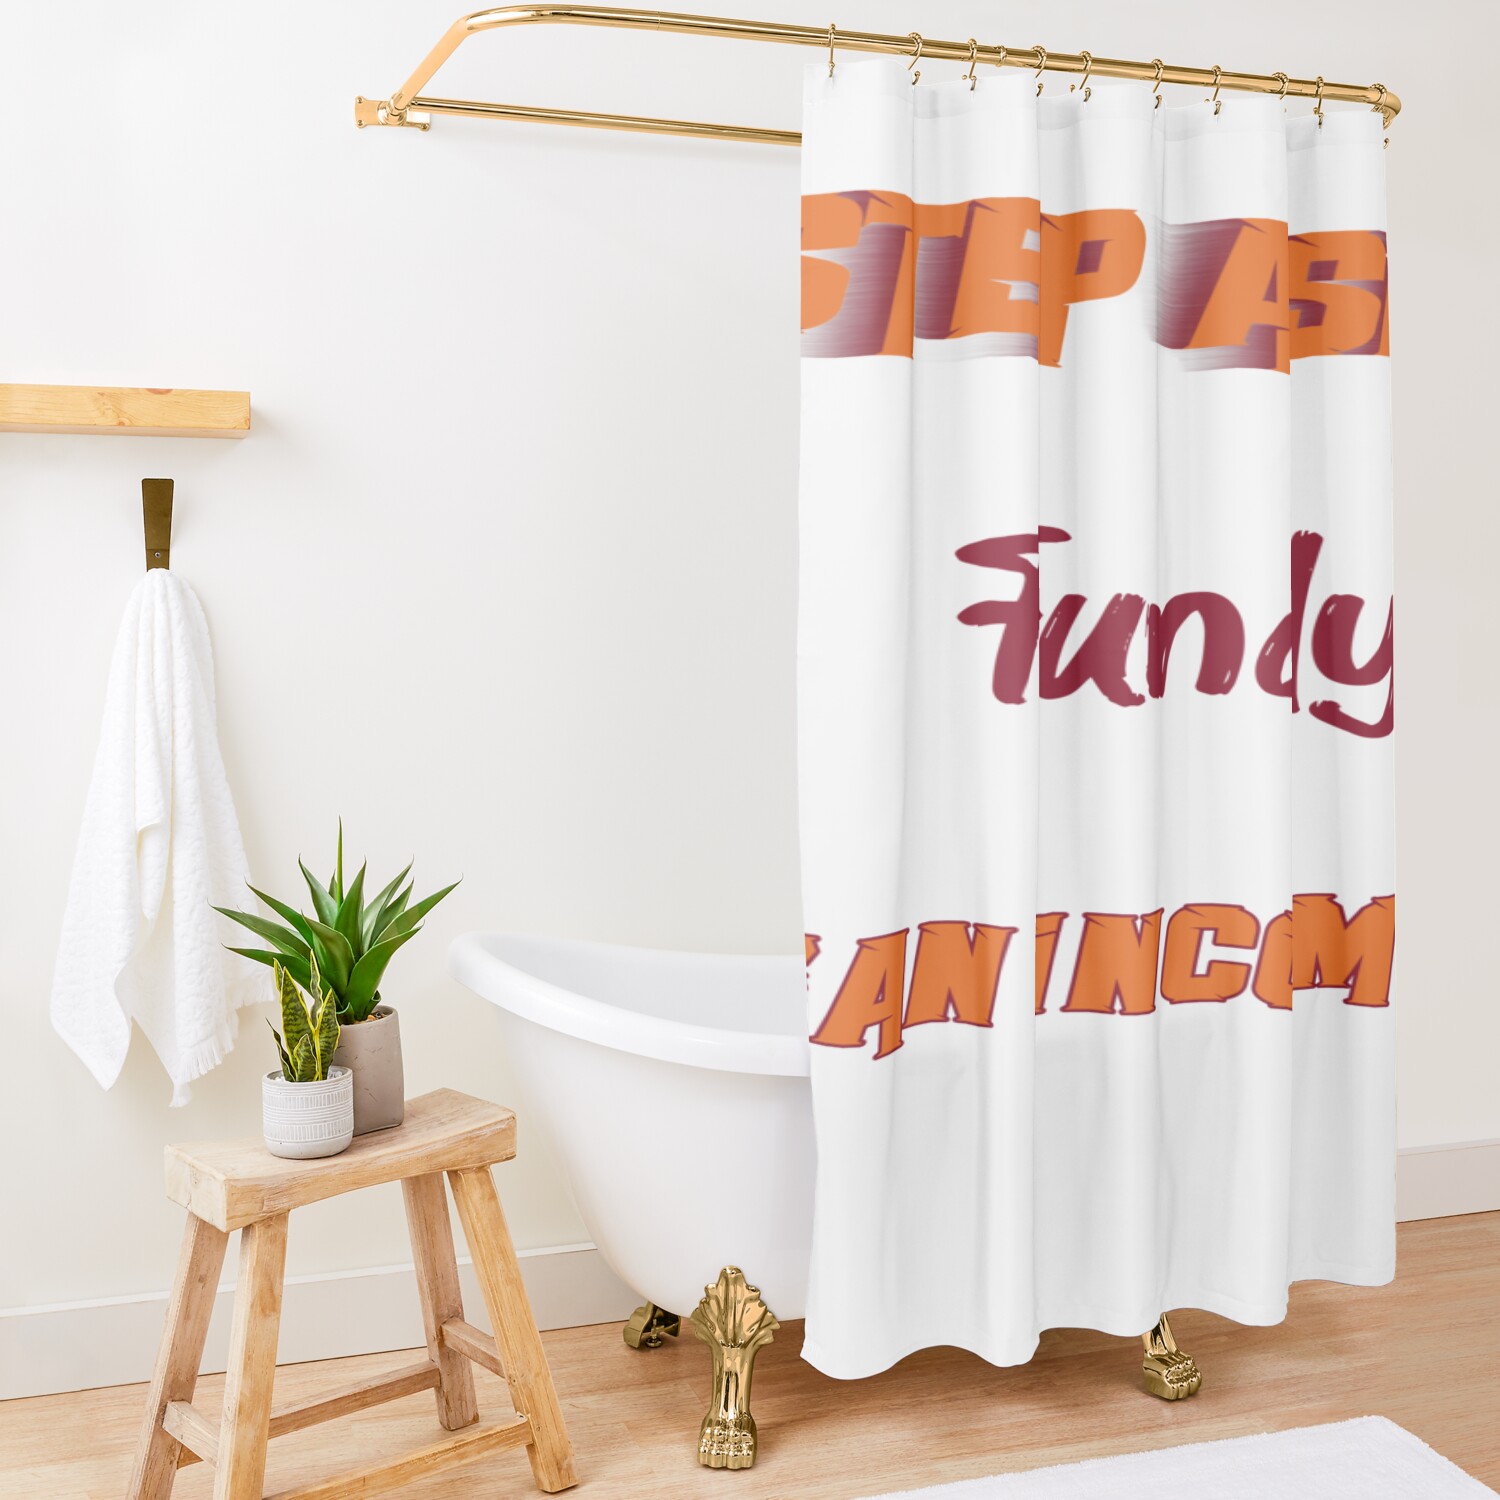 urshower curtain opensquare1500x1500 3 - Fundy Shop